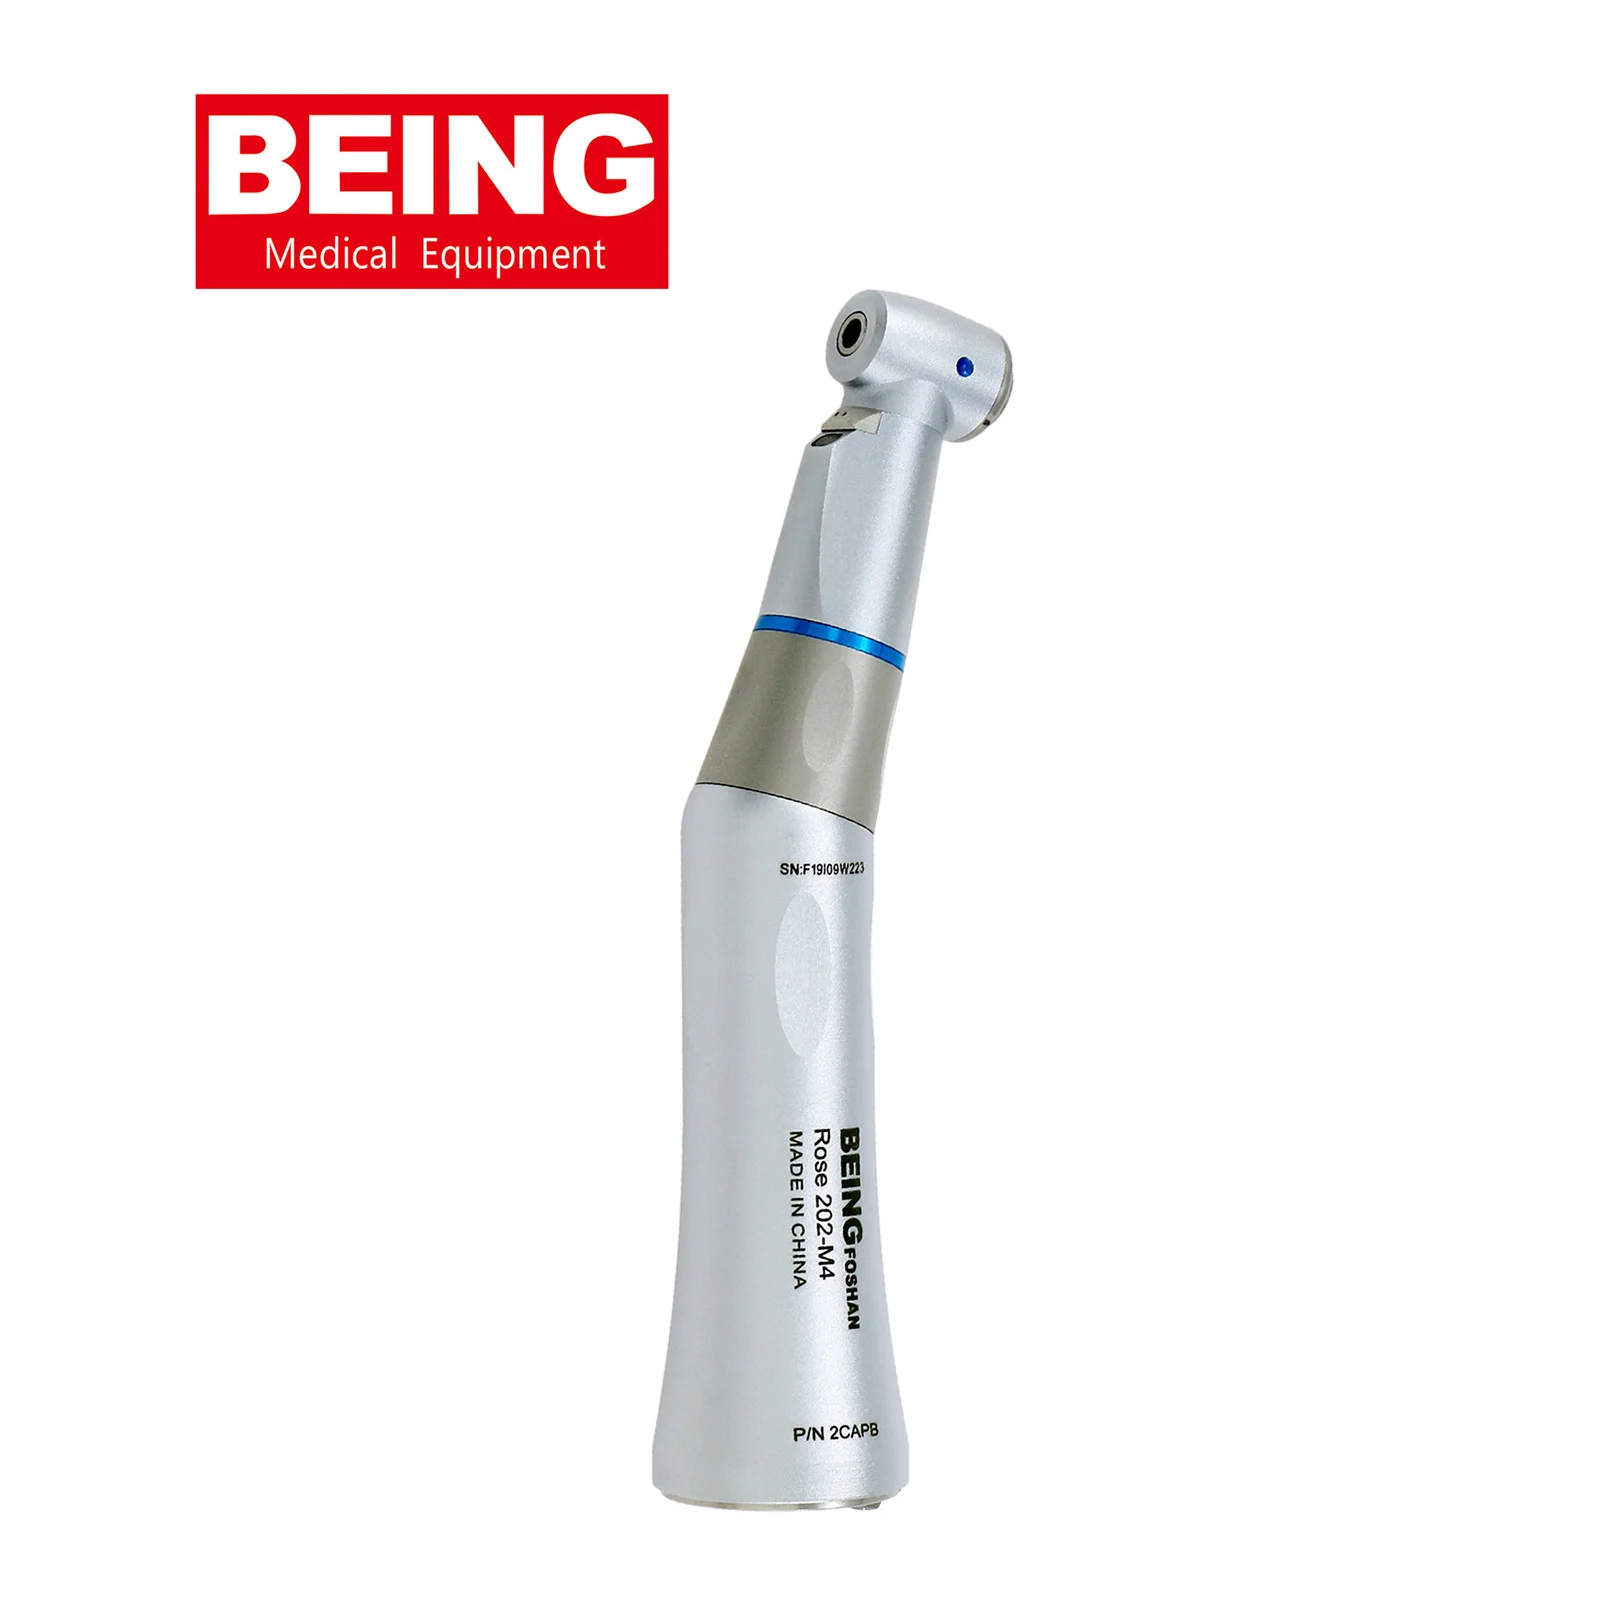 BEING Dental Low Speed Fiber Optic Inner Water Contra angle Handpiece Rose 202CAPB Kavo style INTRAmatic Head